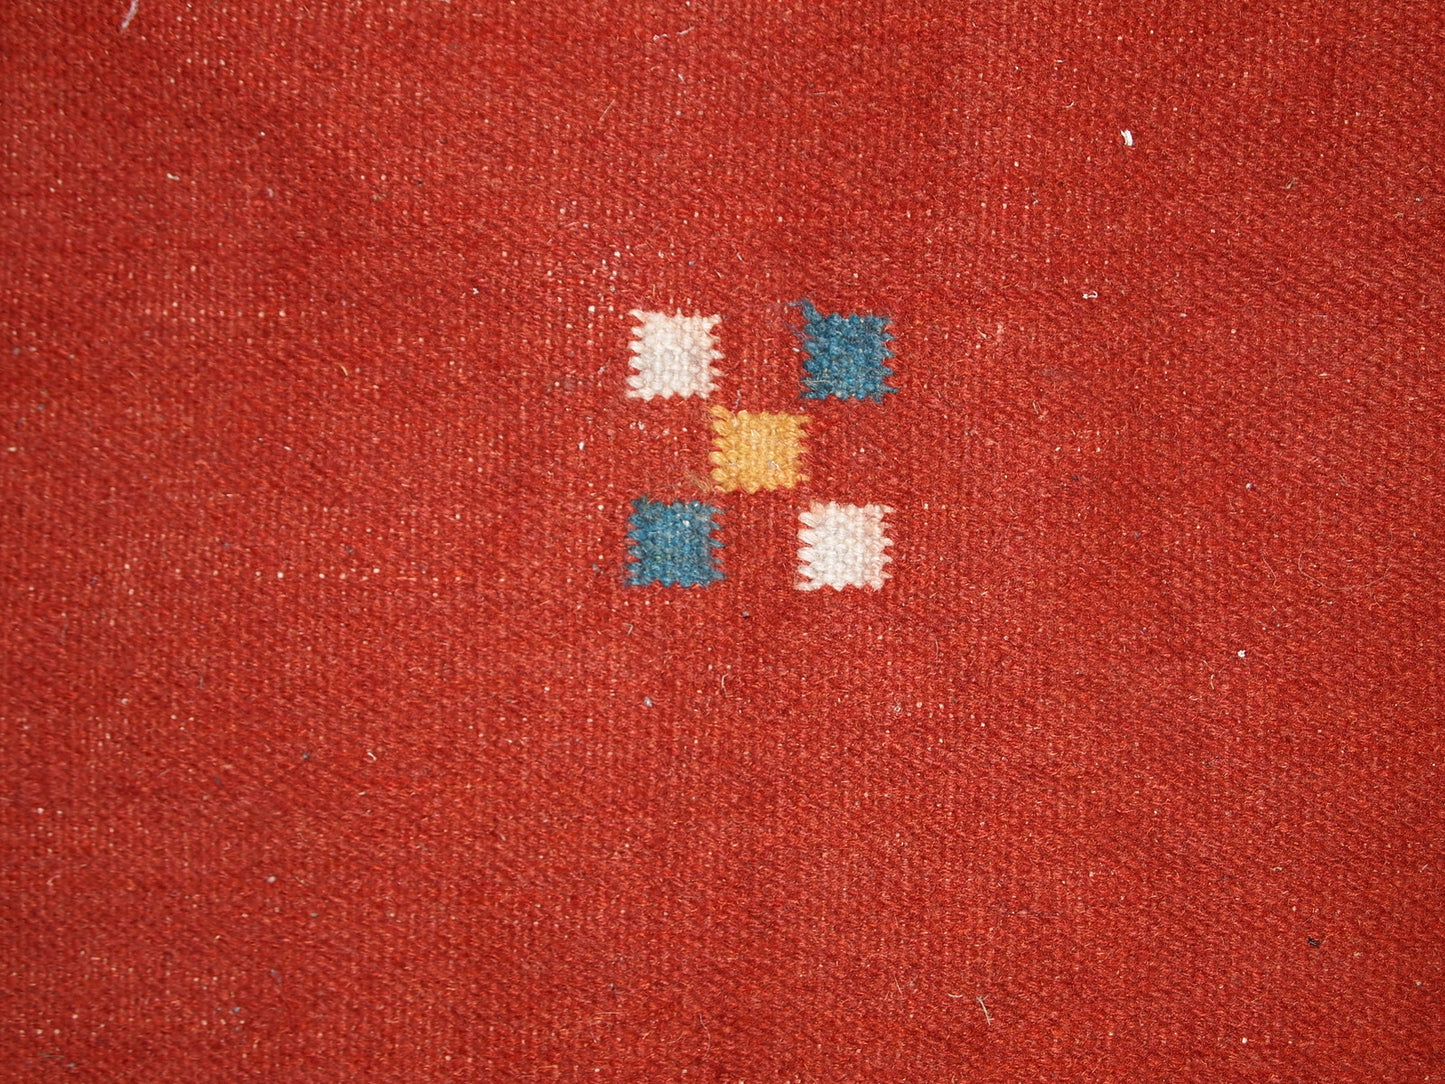 Mid-century Persian kilim in red shade and all-over design. Miniature animals are in navy blue shade along with border. Sky blue colors are in each corner. The kilim is generally in original good condition, one corner is missing.